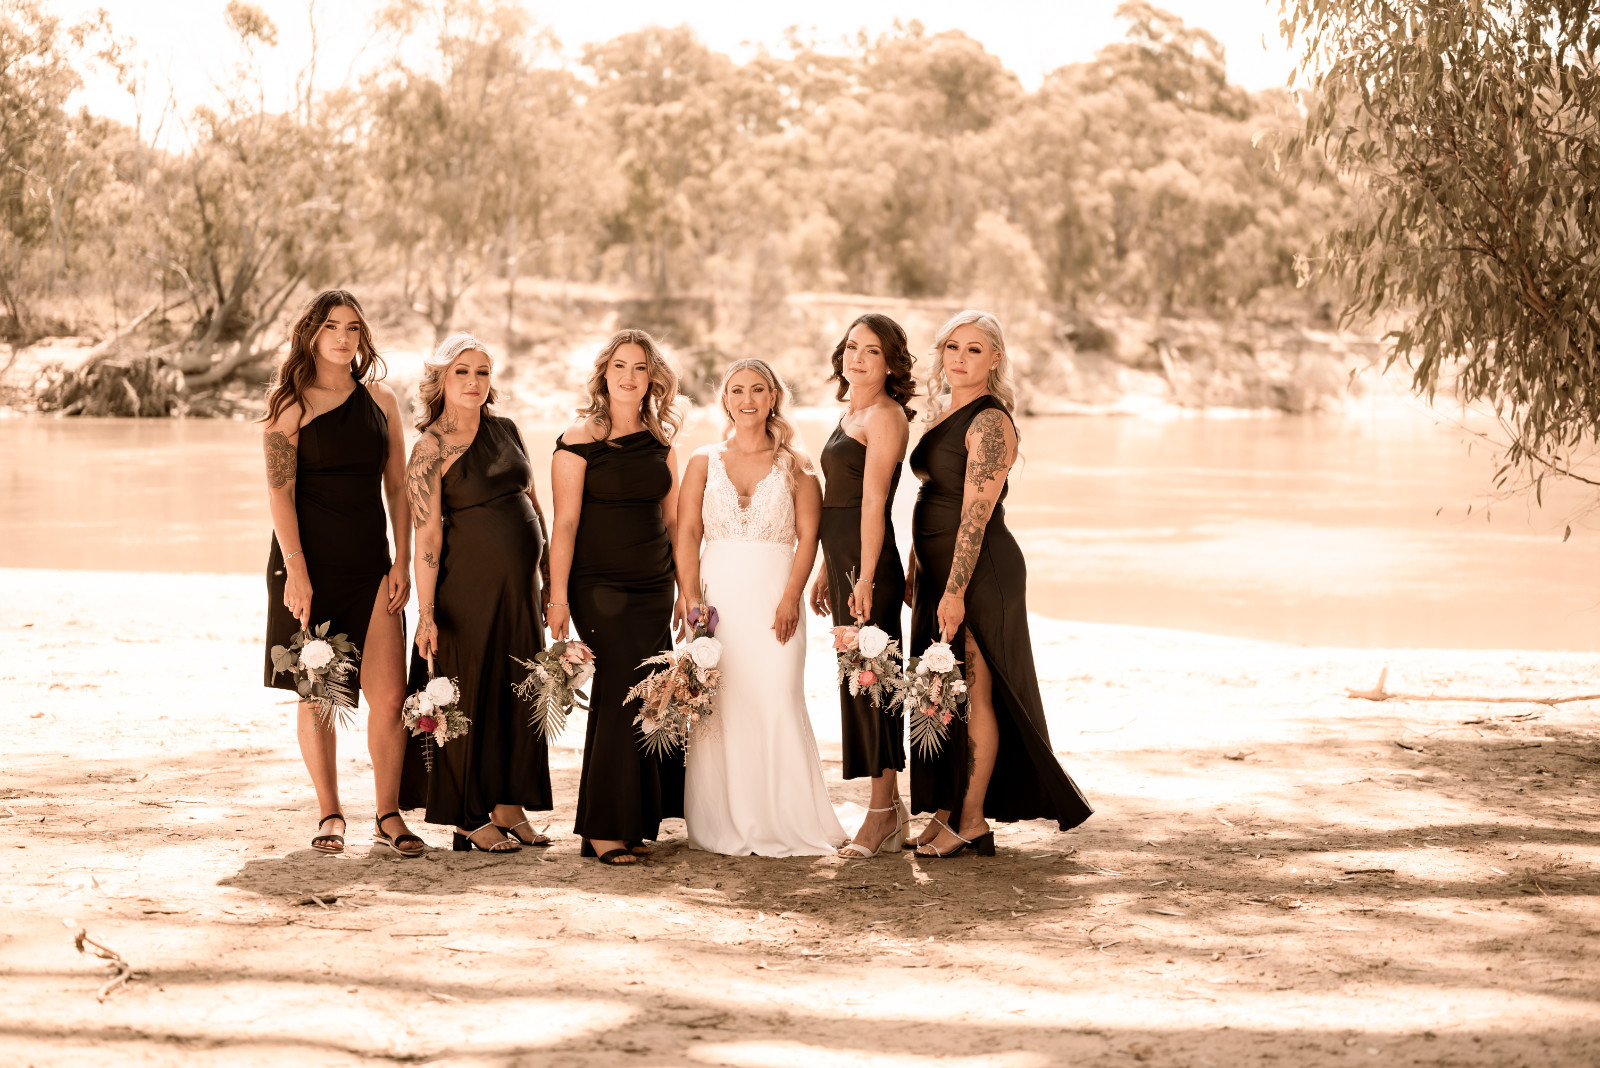 Shelby and Connor's Rich River Golf Course wedding captured by Jess Verhey Photography